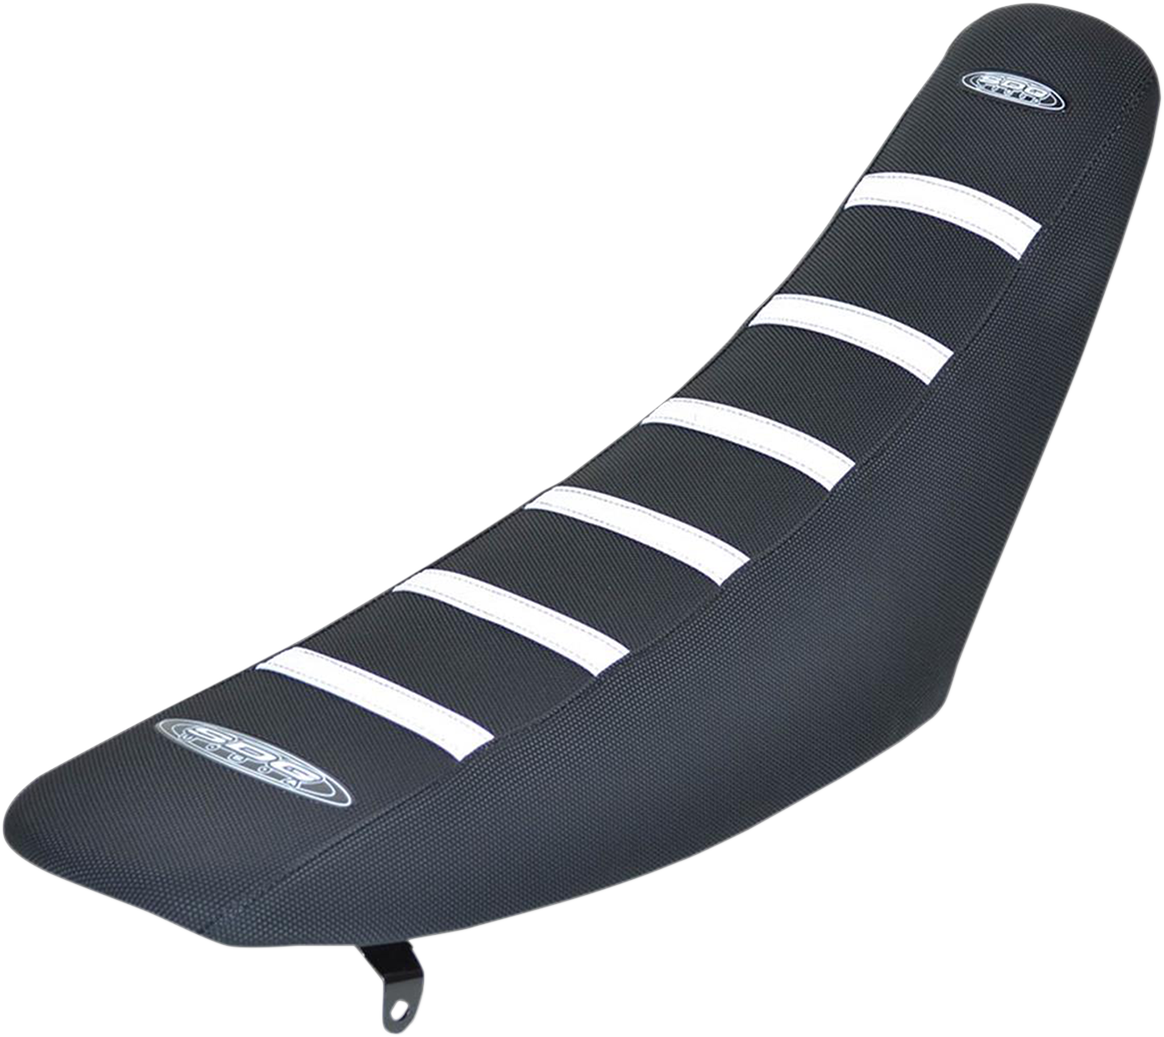 SDG 6-Ribbed Seat Cover - White Ribs/Black Top/Black Sides 95957WK